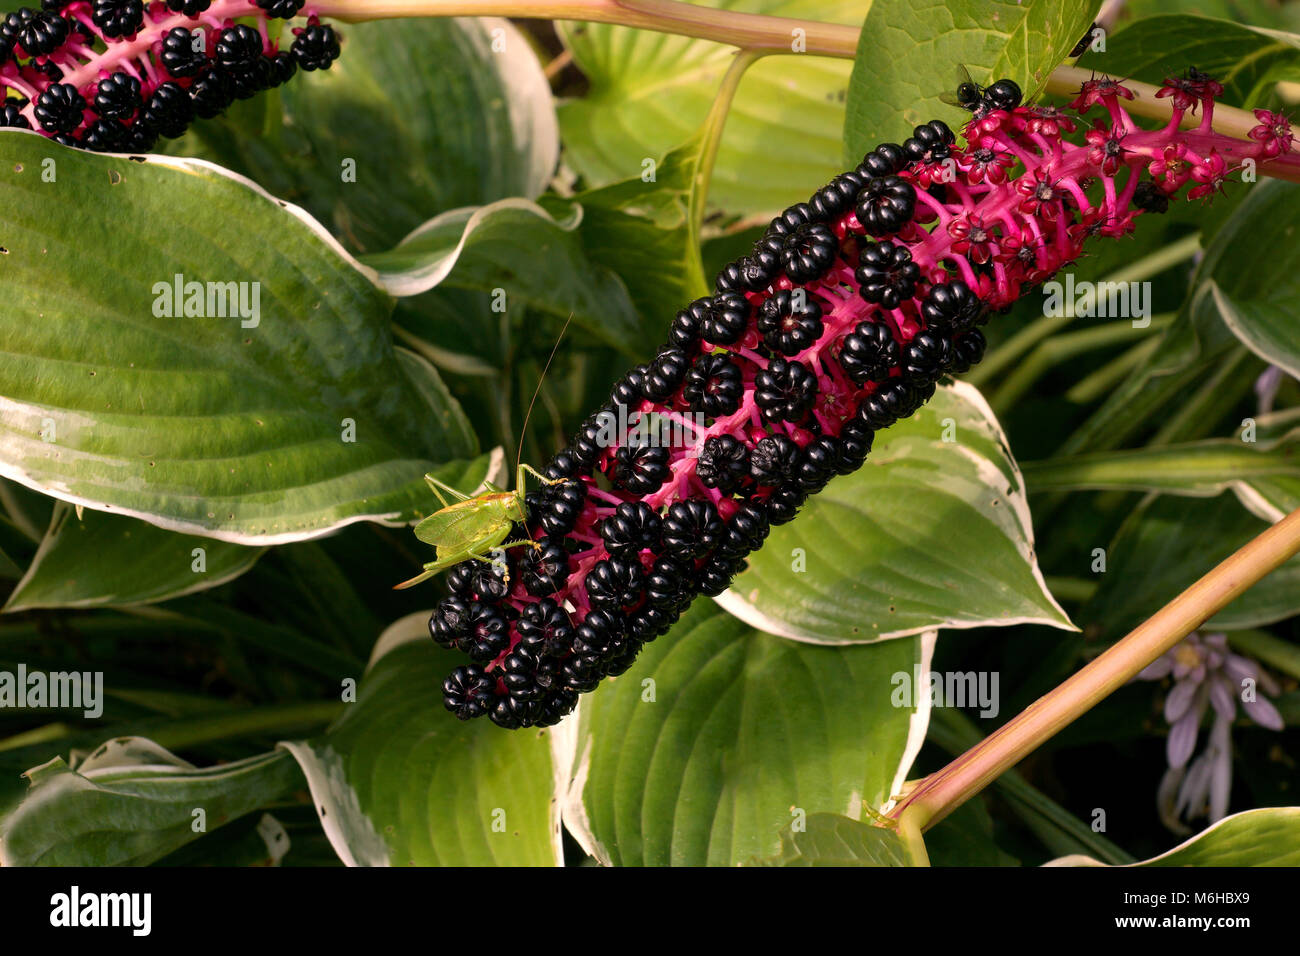 Phytolacca acinosa foliage and fruit. Phytolacca is a genus of perennial plants. Stock Photo